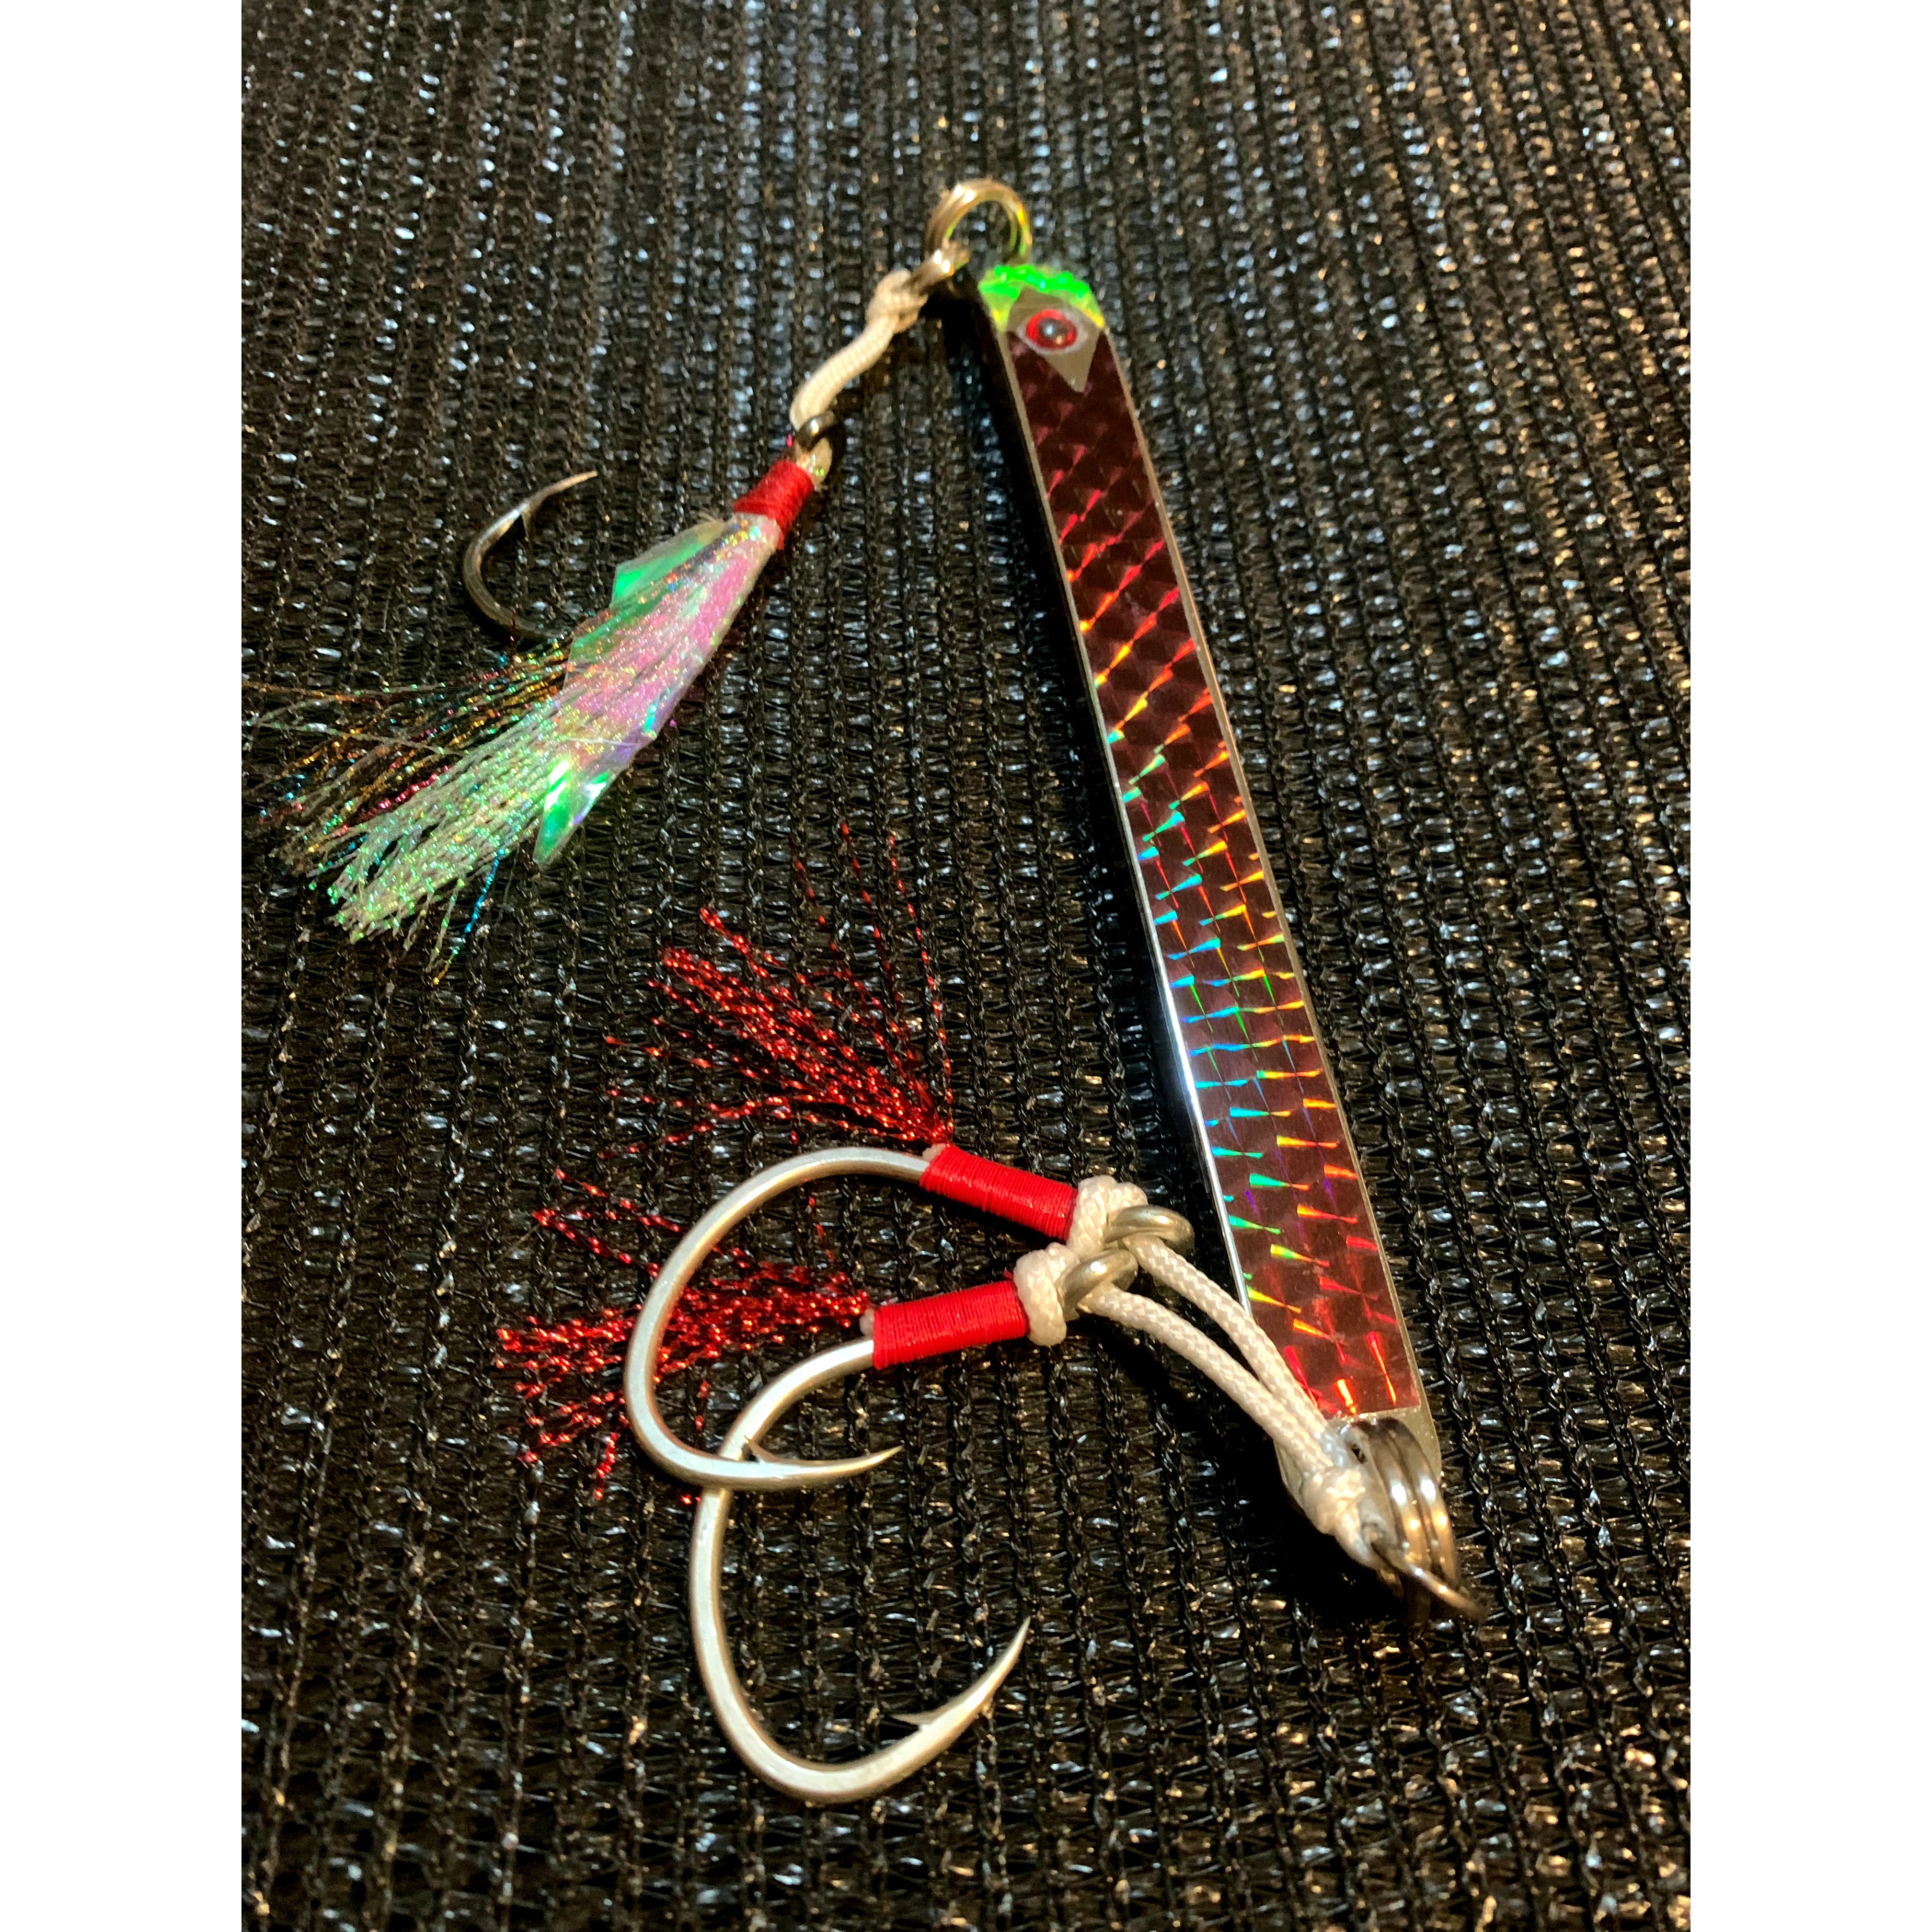 Fishing Metal Hand Made Jig Lures 150mm 105g